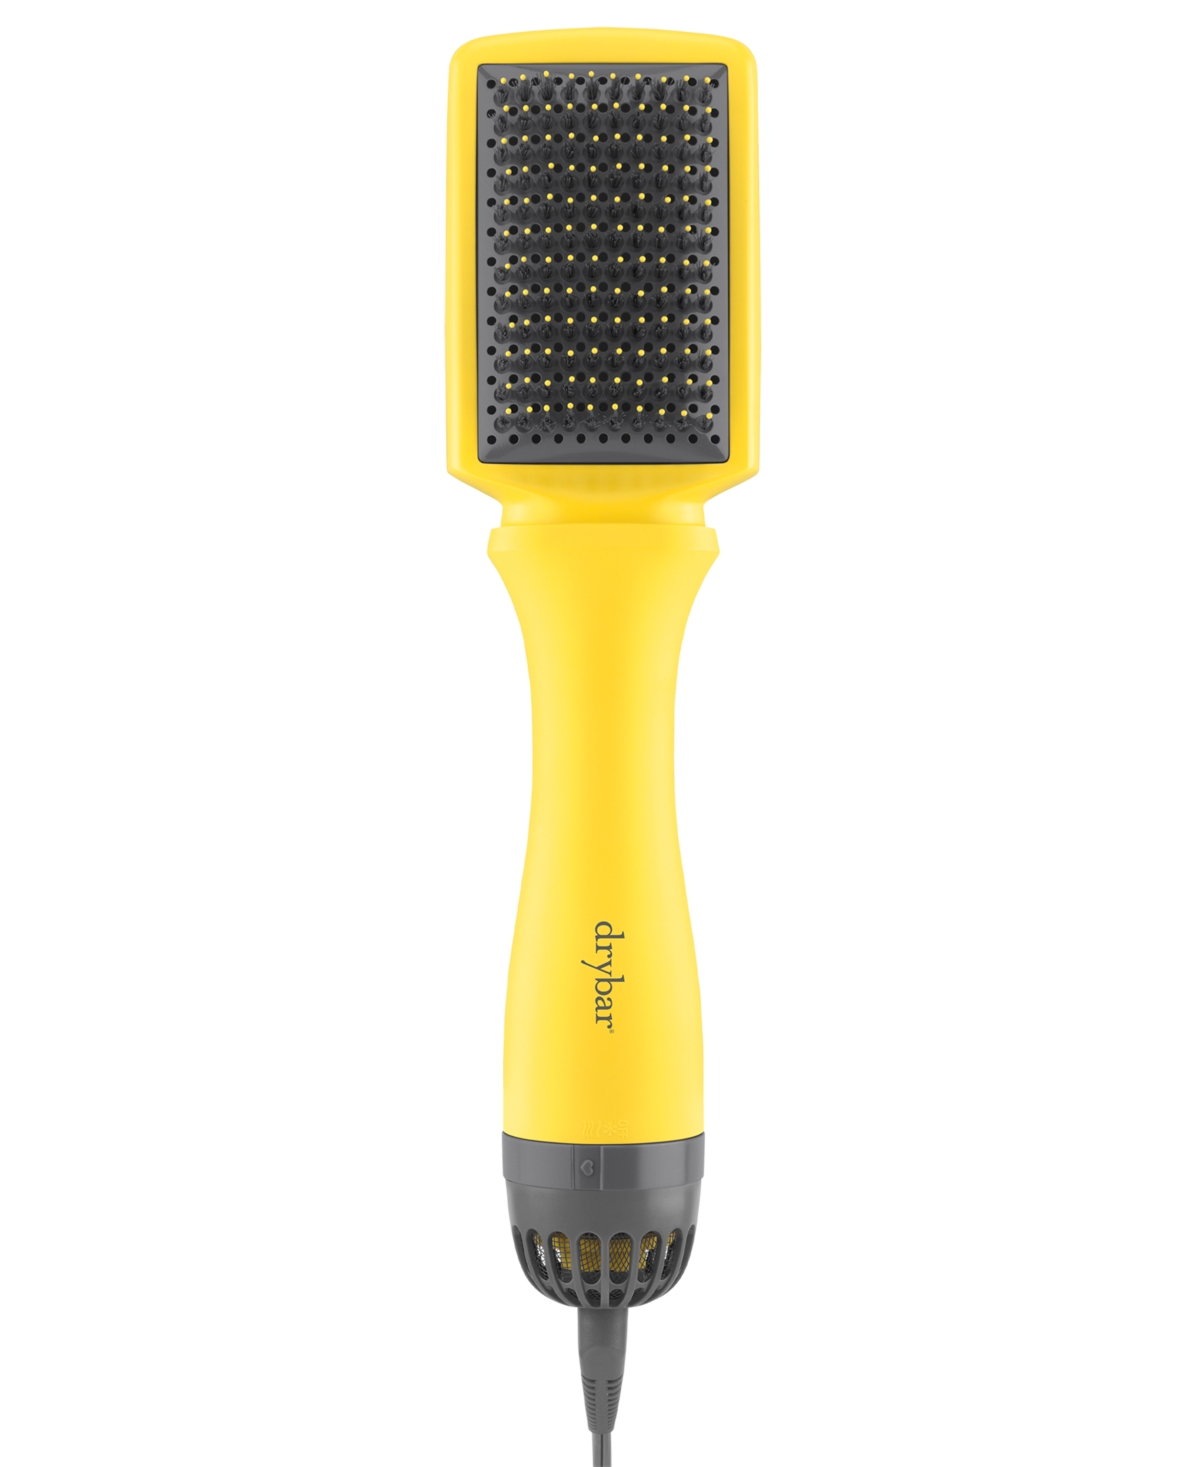 Drybar The Smooth Shot Paddle Brush Blow-dryer In No Color